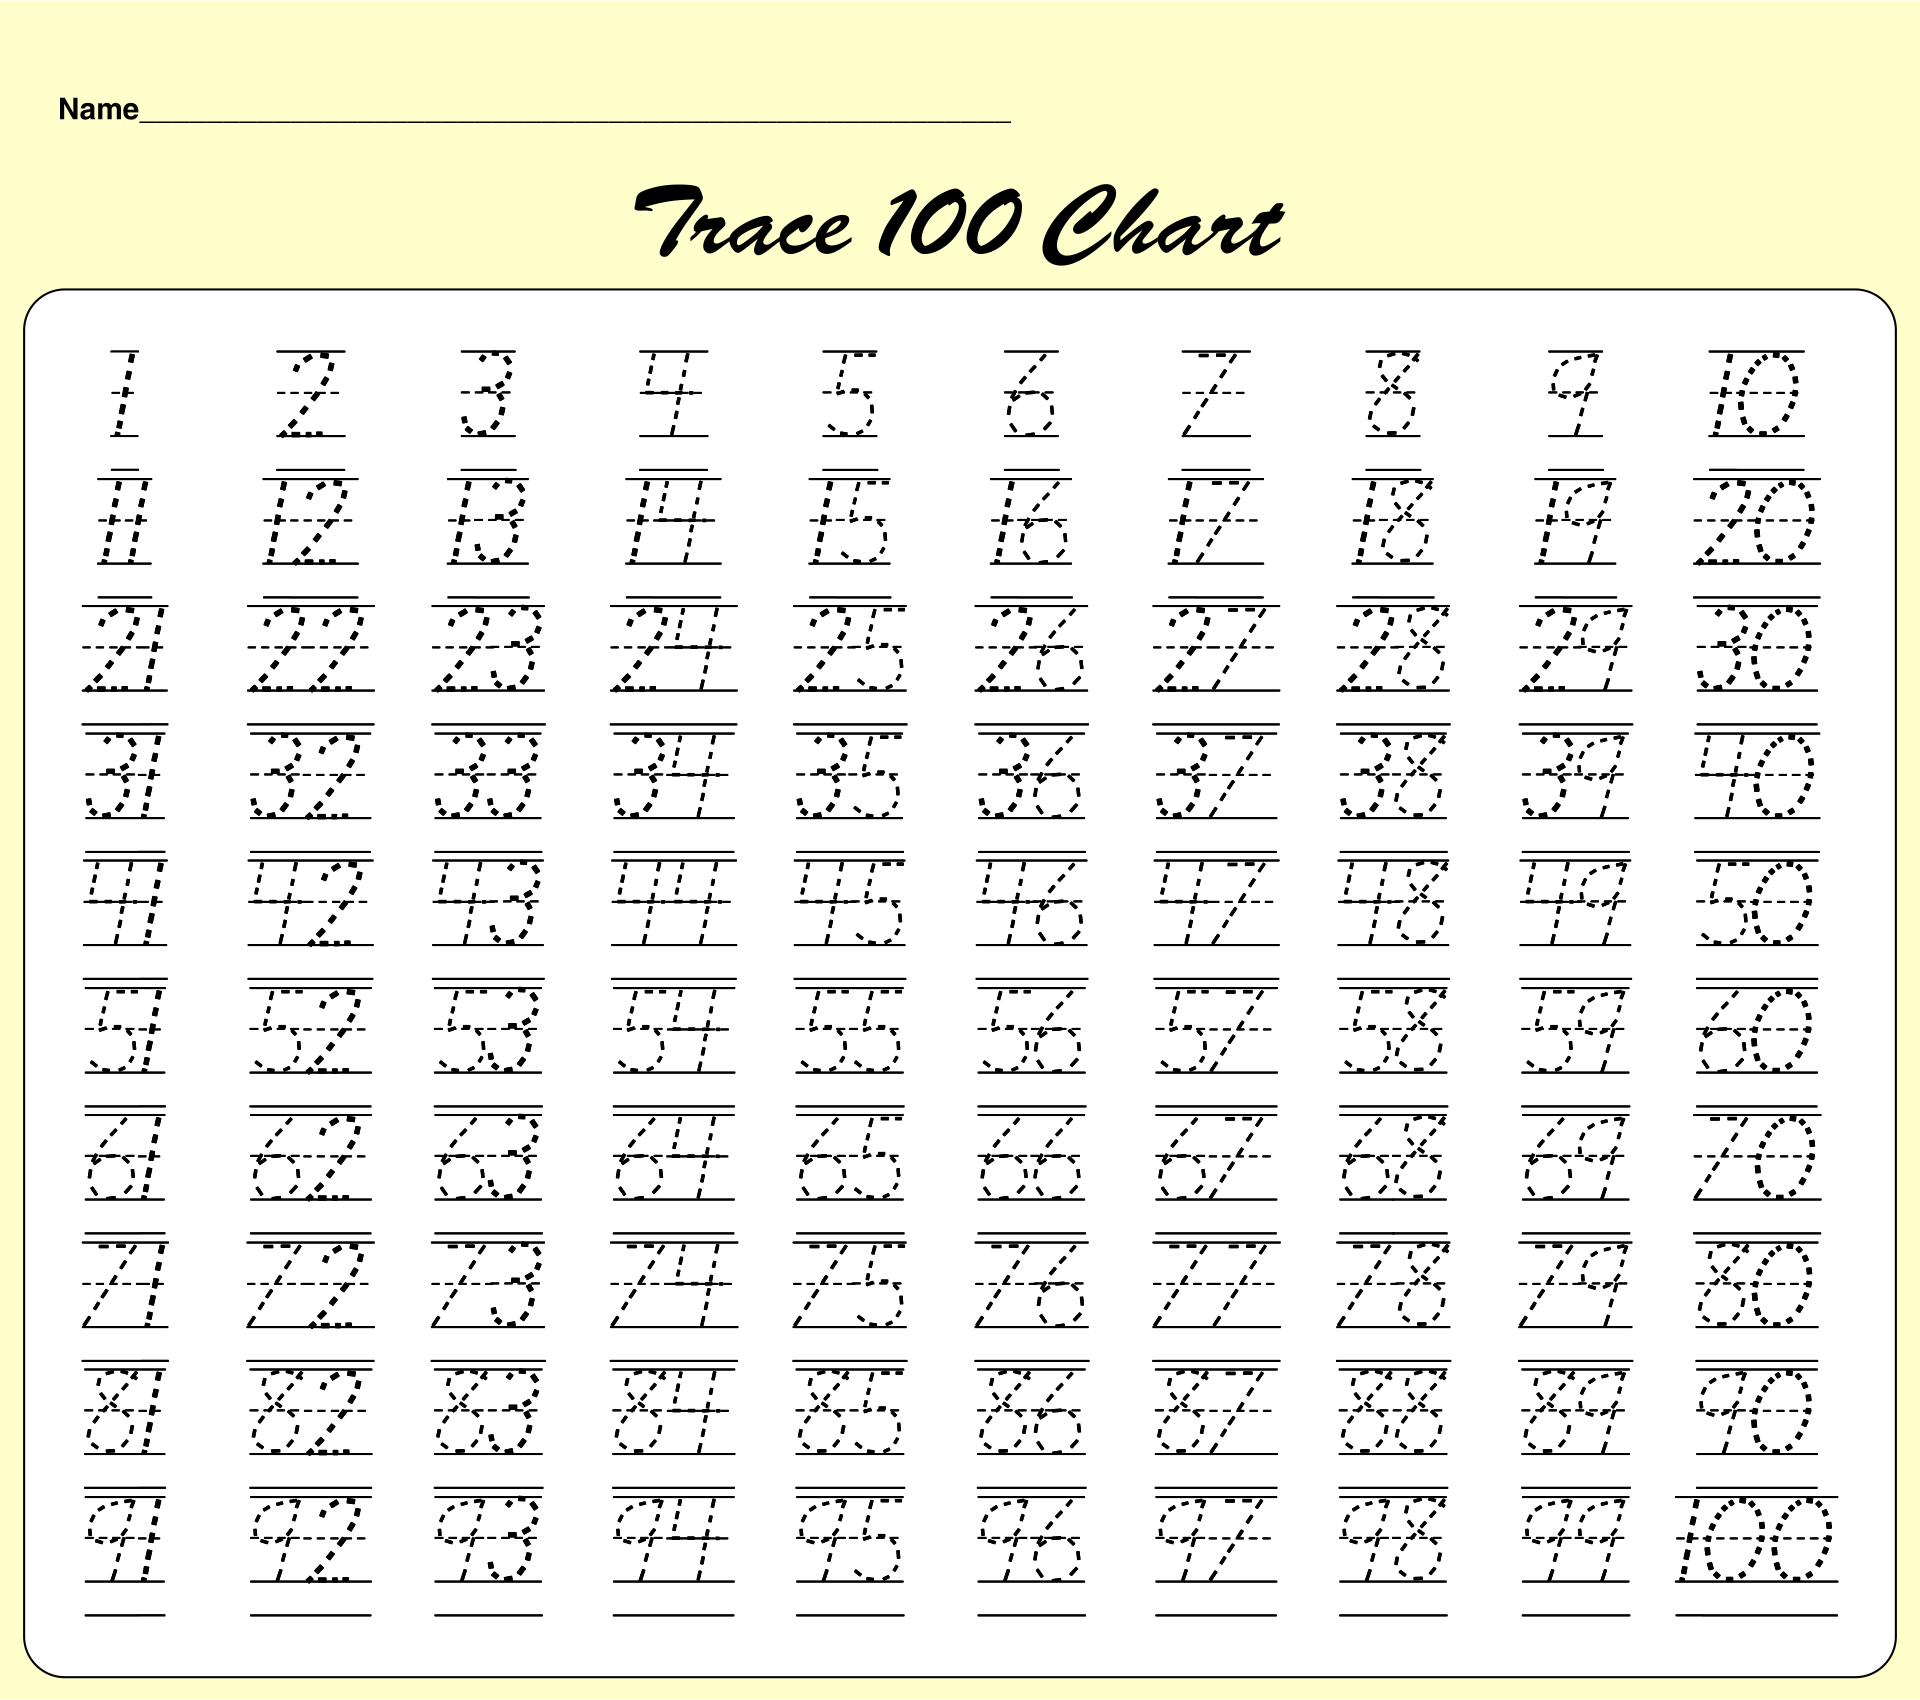 number-writing-practice-1-100-number-tracing-worksheets-by-montessori-momo-trace-numbers-1-100